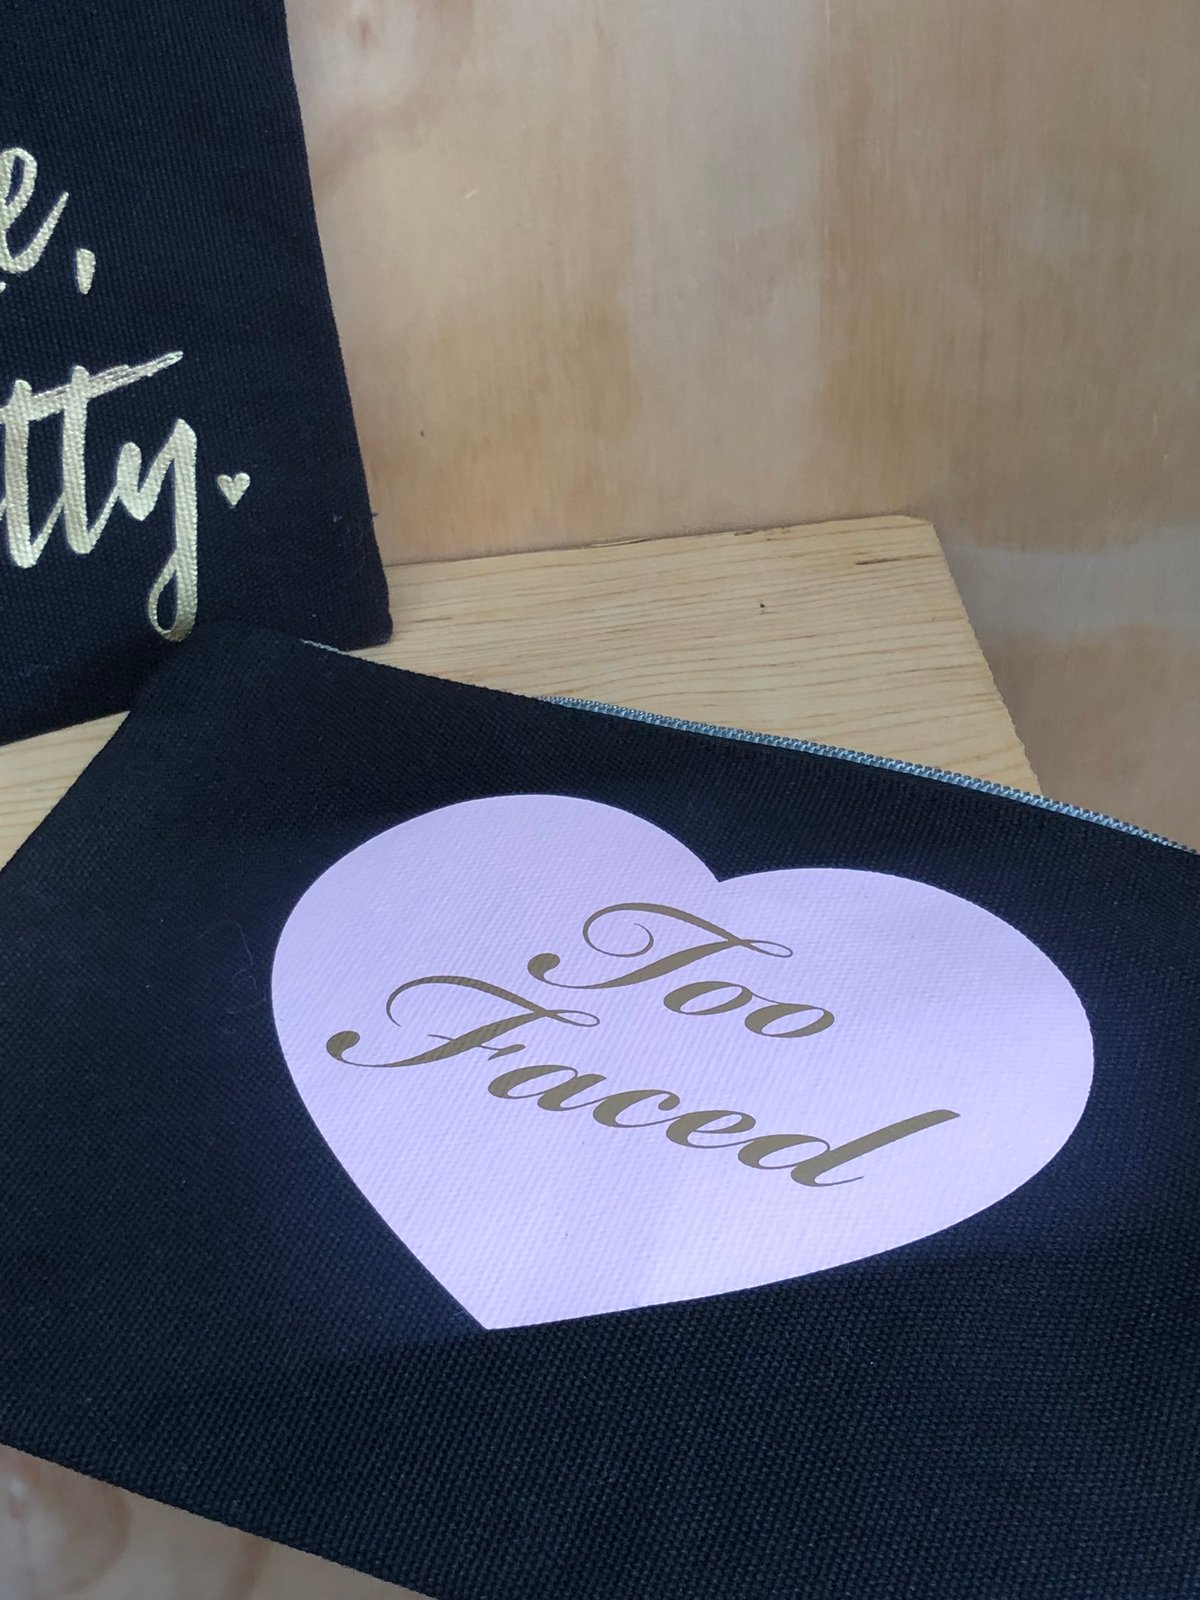 Image of Too Faced Canvas Make Up Bag